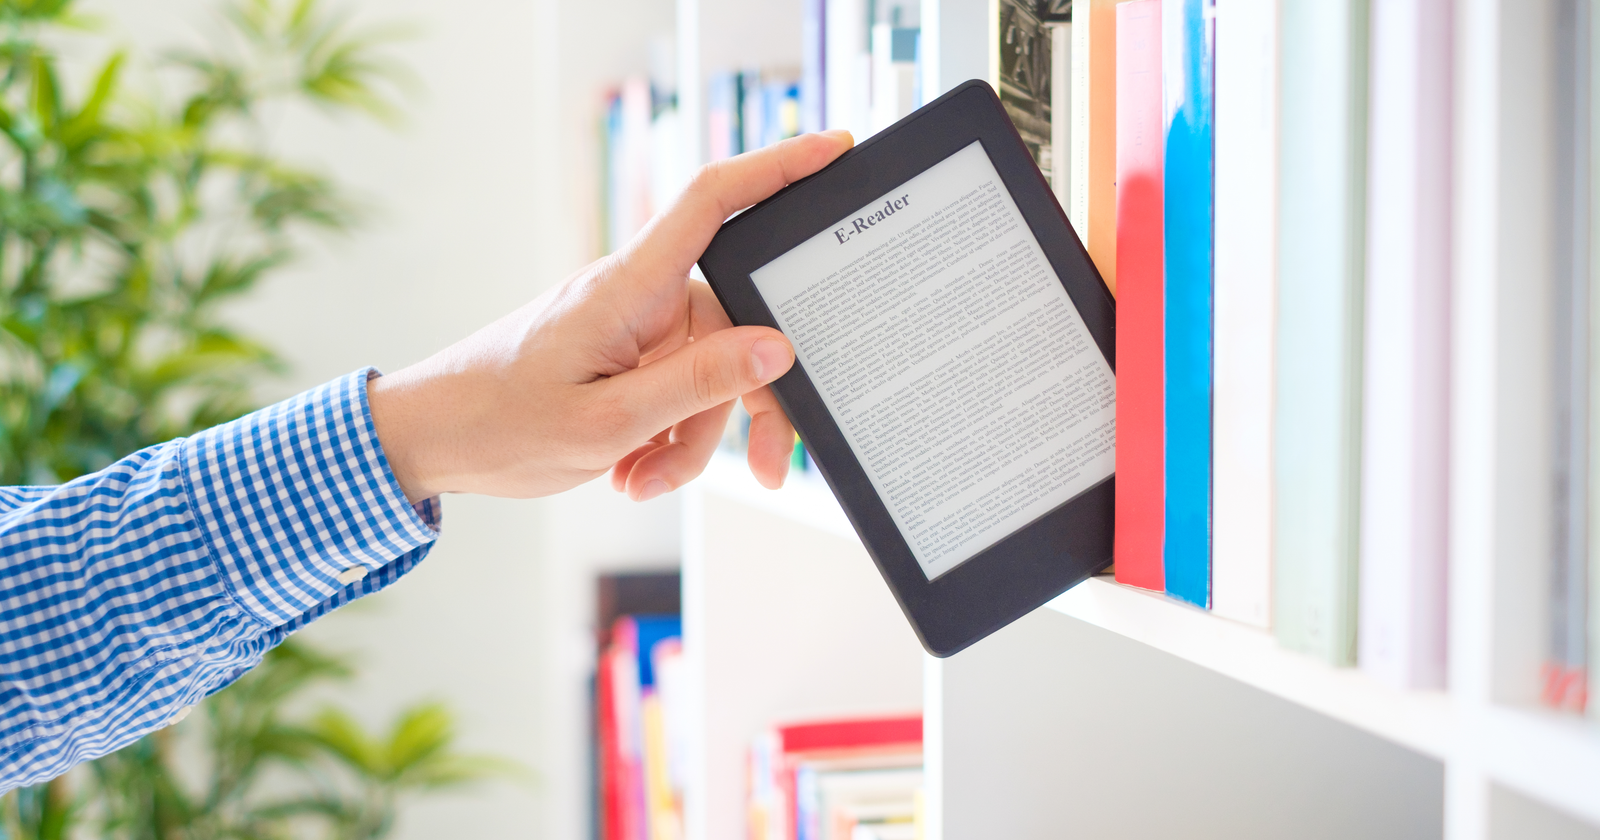 How to Write, Design & Promote an Ebook - A Complete Guide